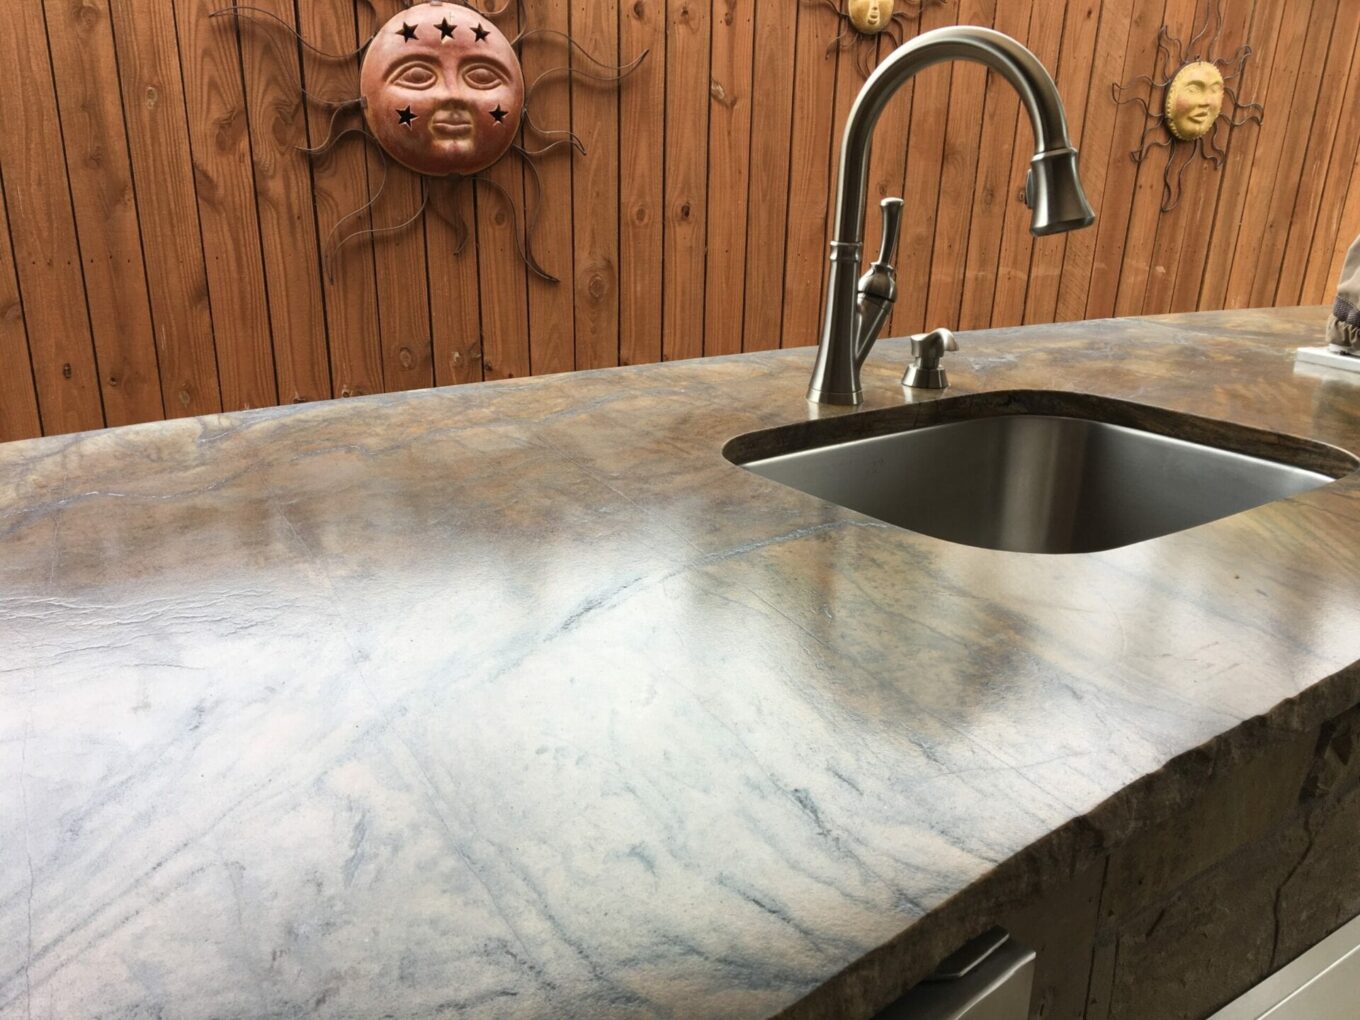 A sink and counter in the kitchen of a home.